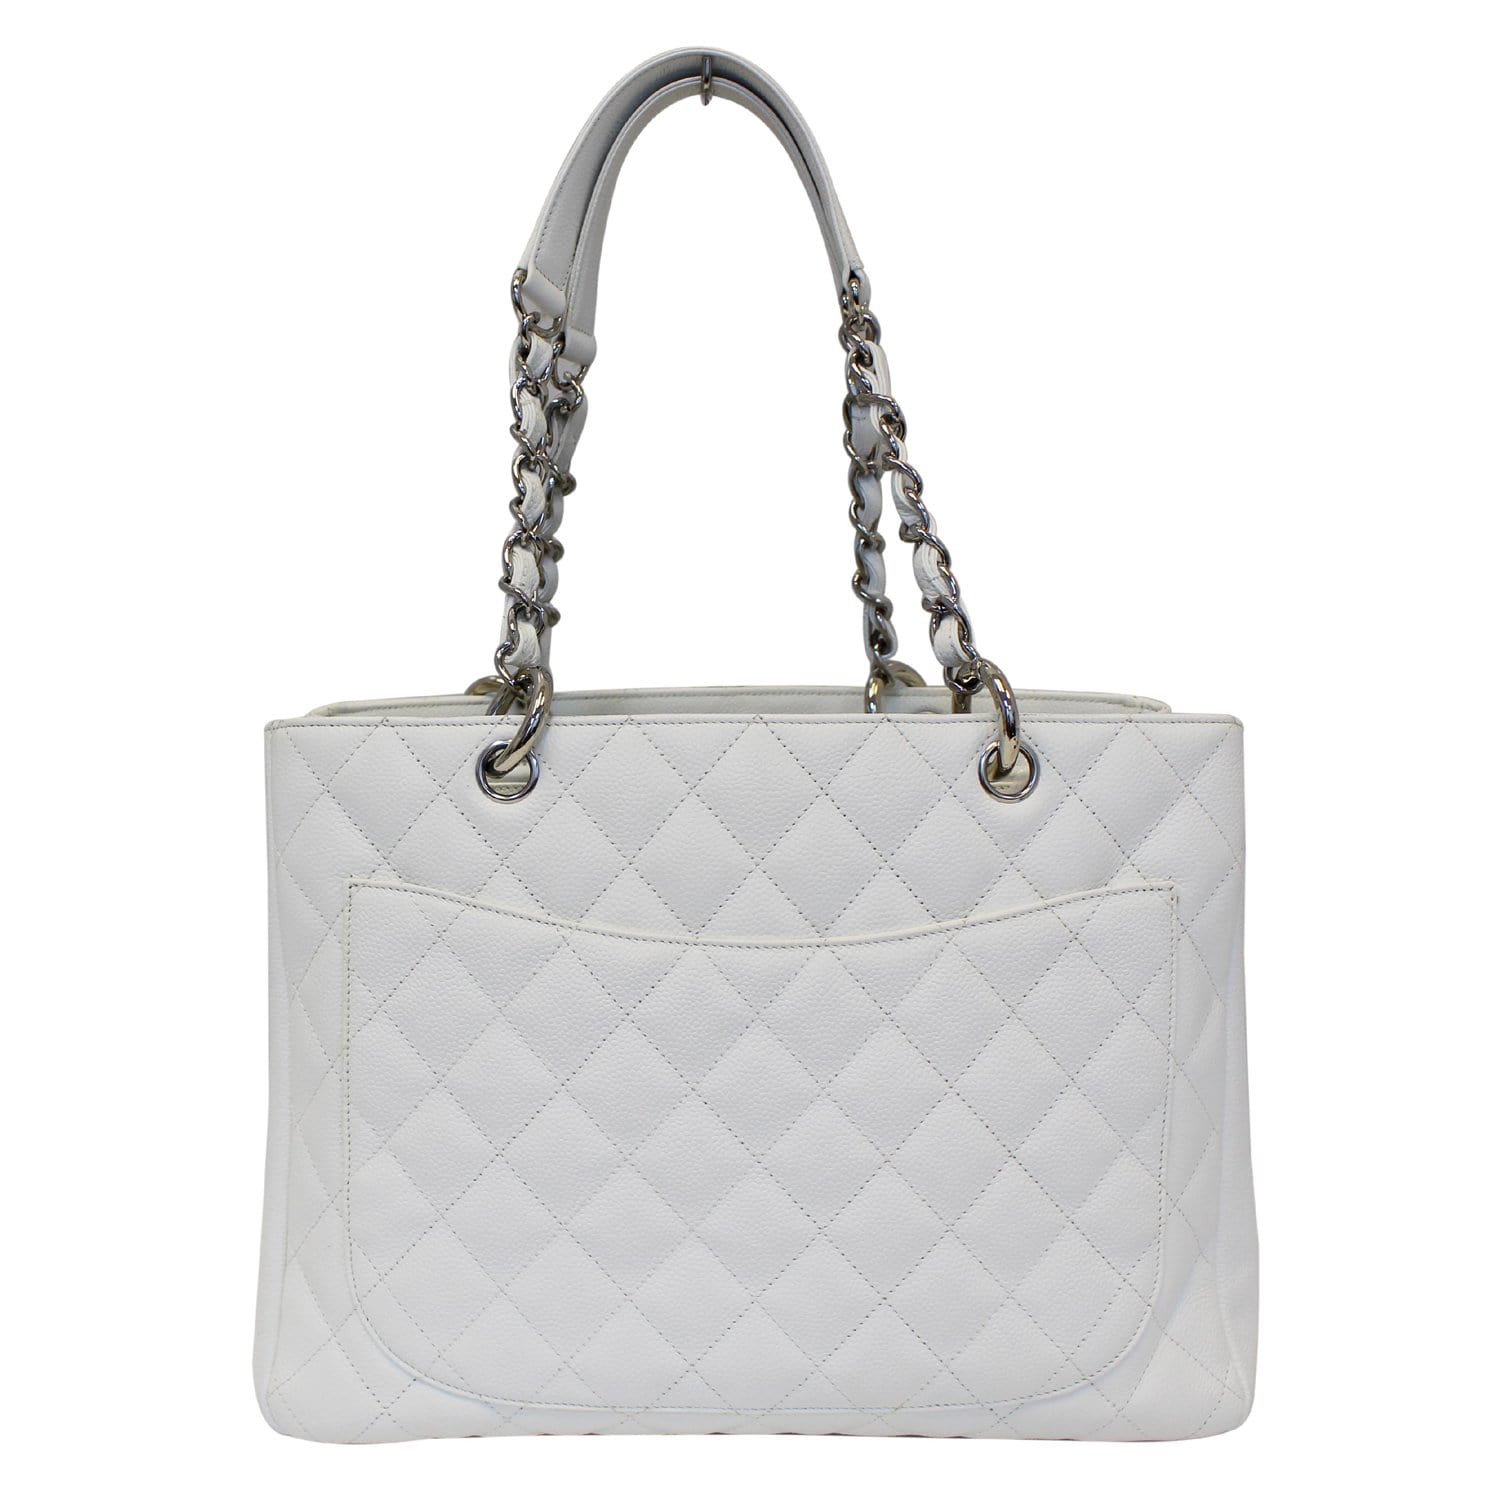 Chanel Quilted Caviar Leather Shopping Tote Handbags